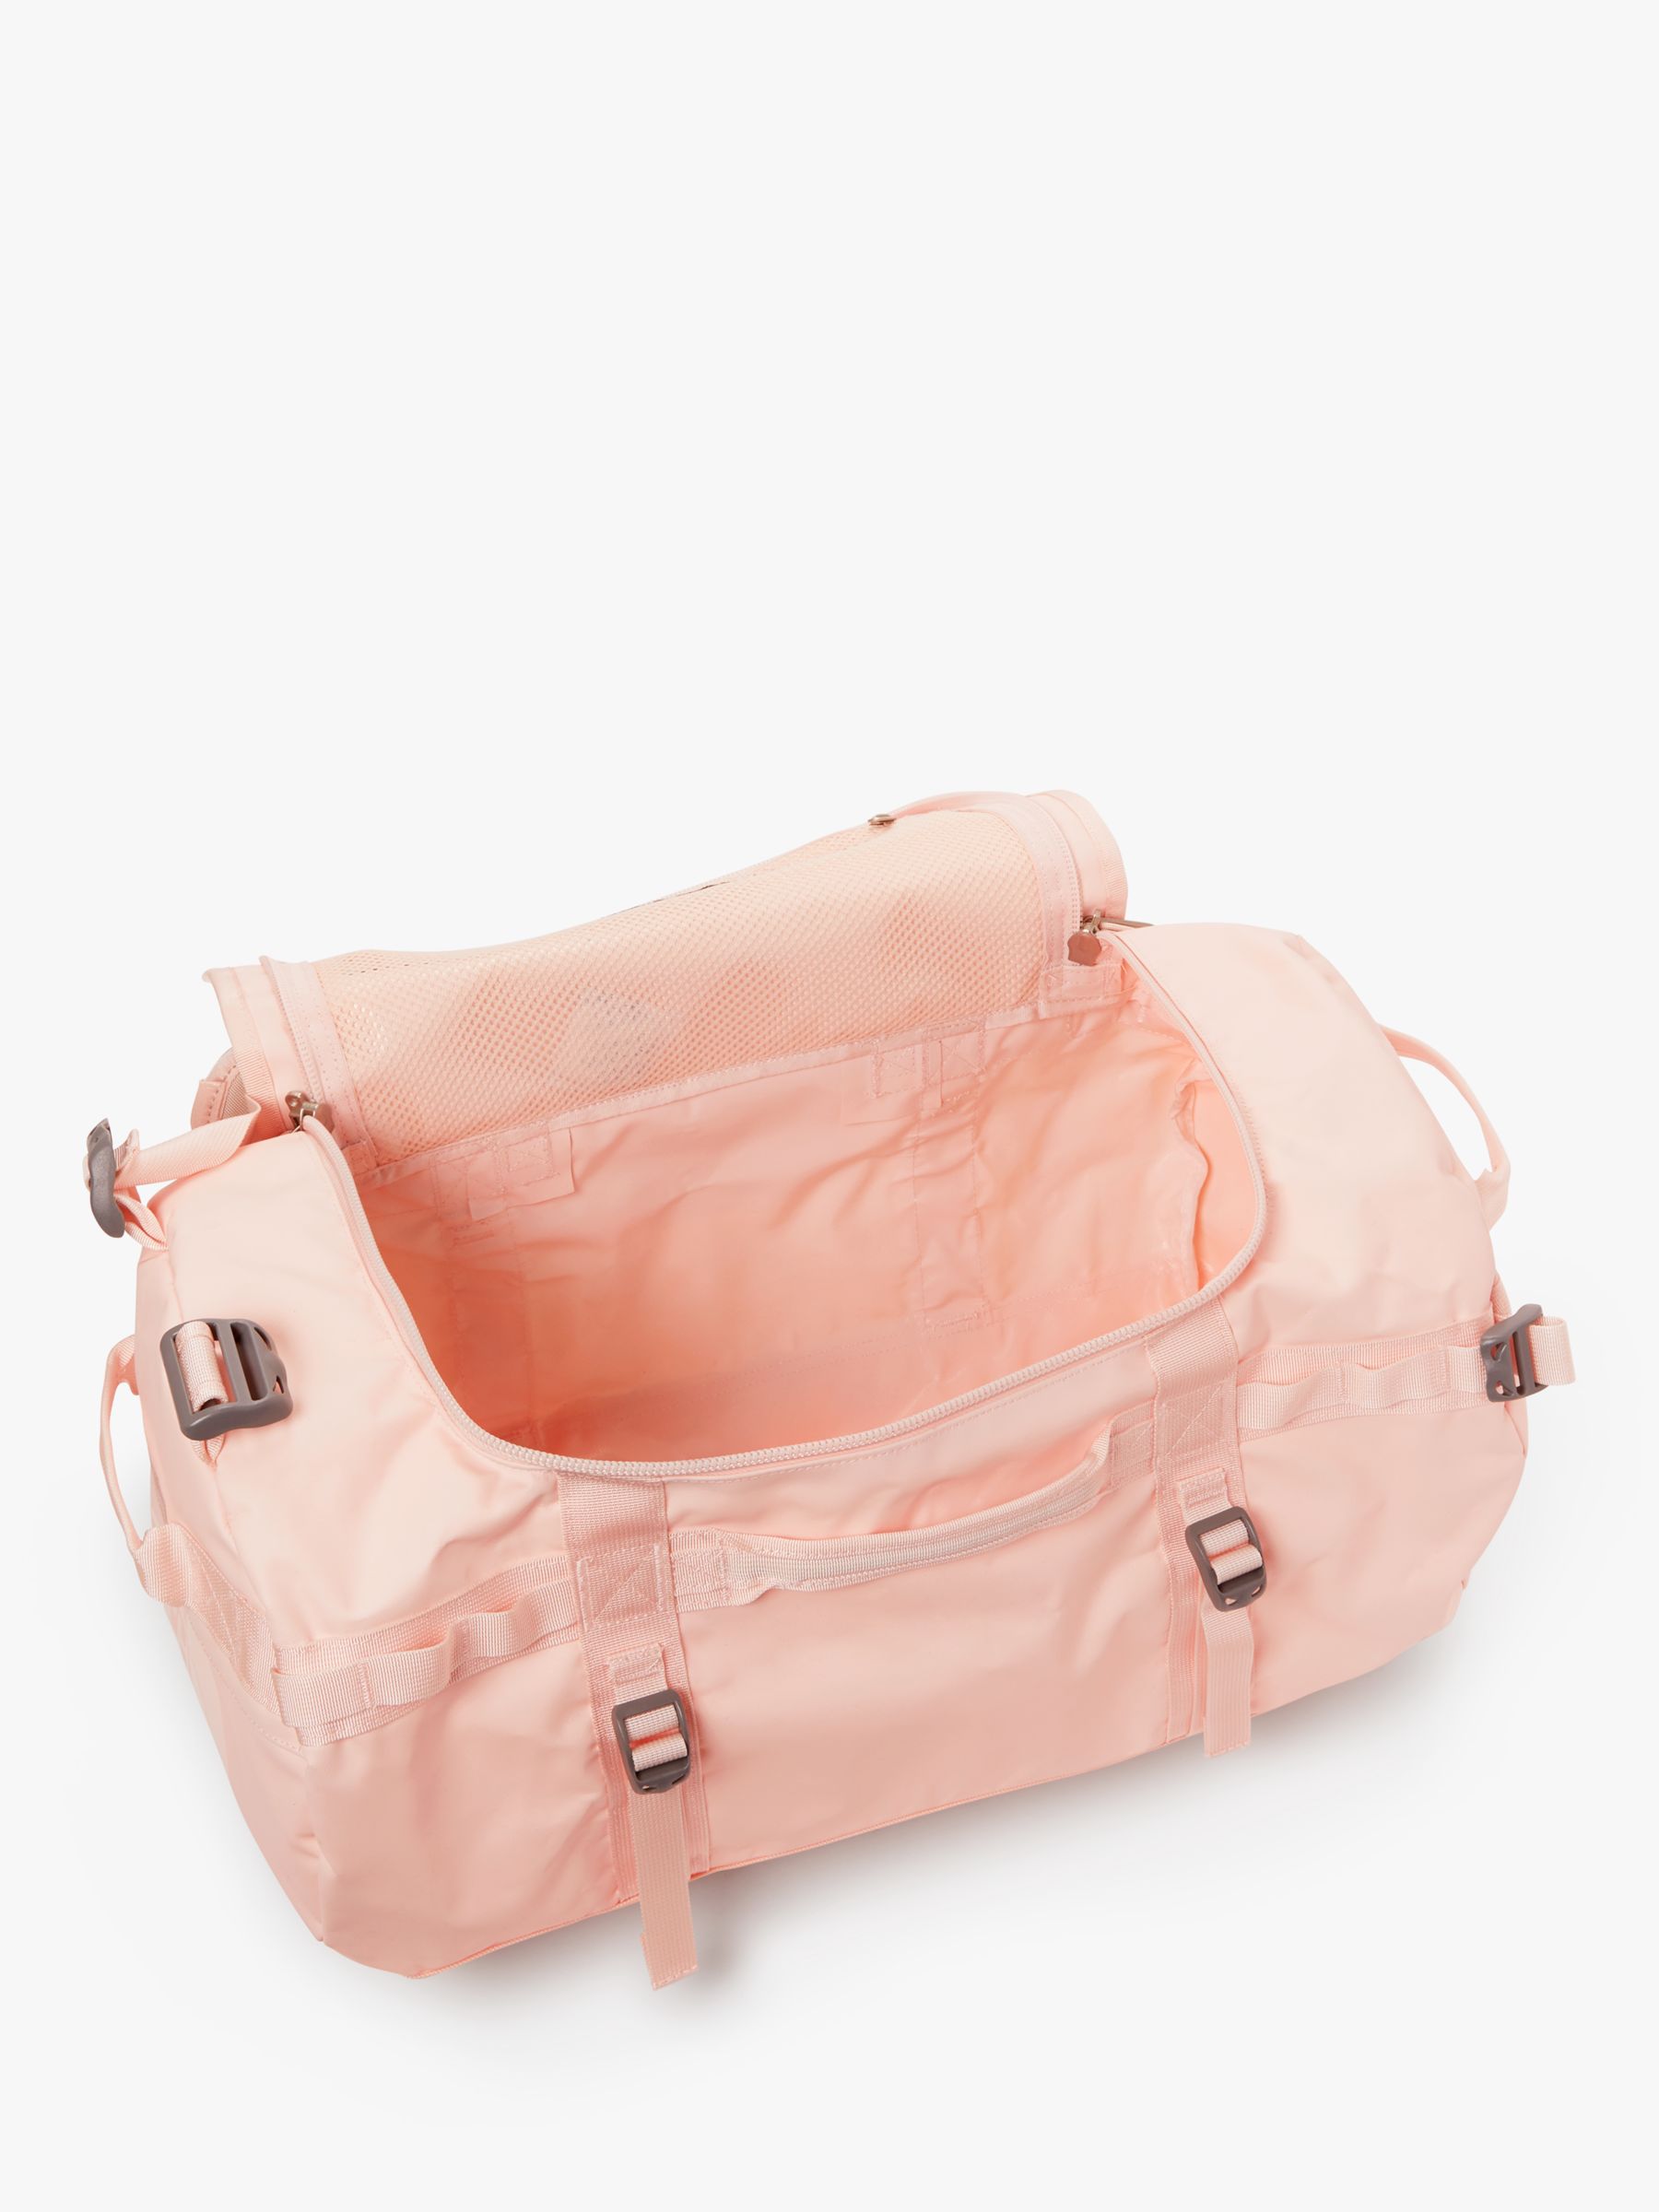 north face base camp duffel small pink